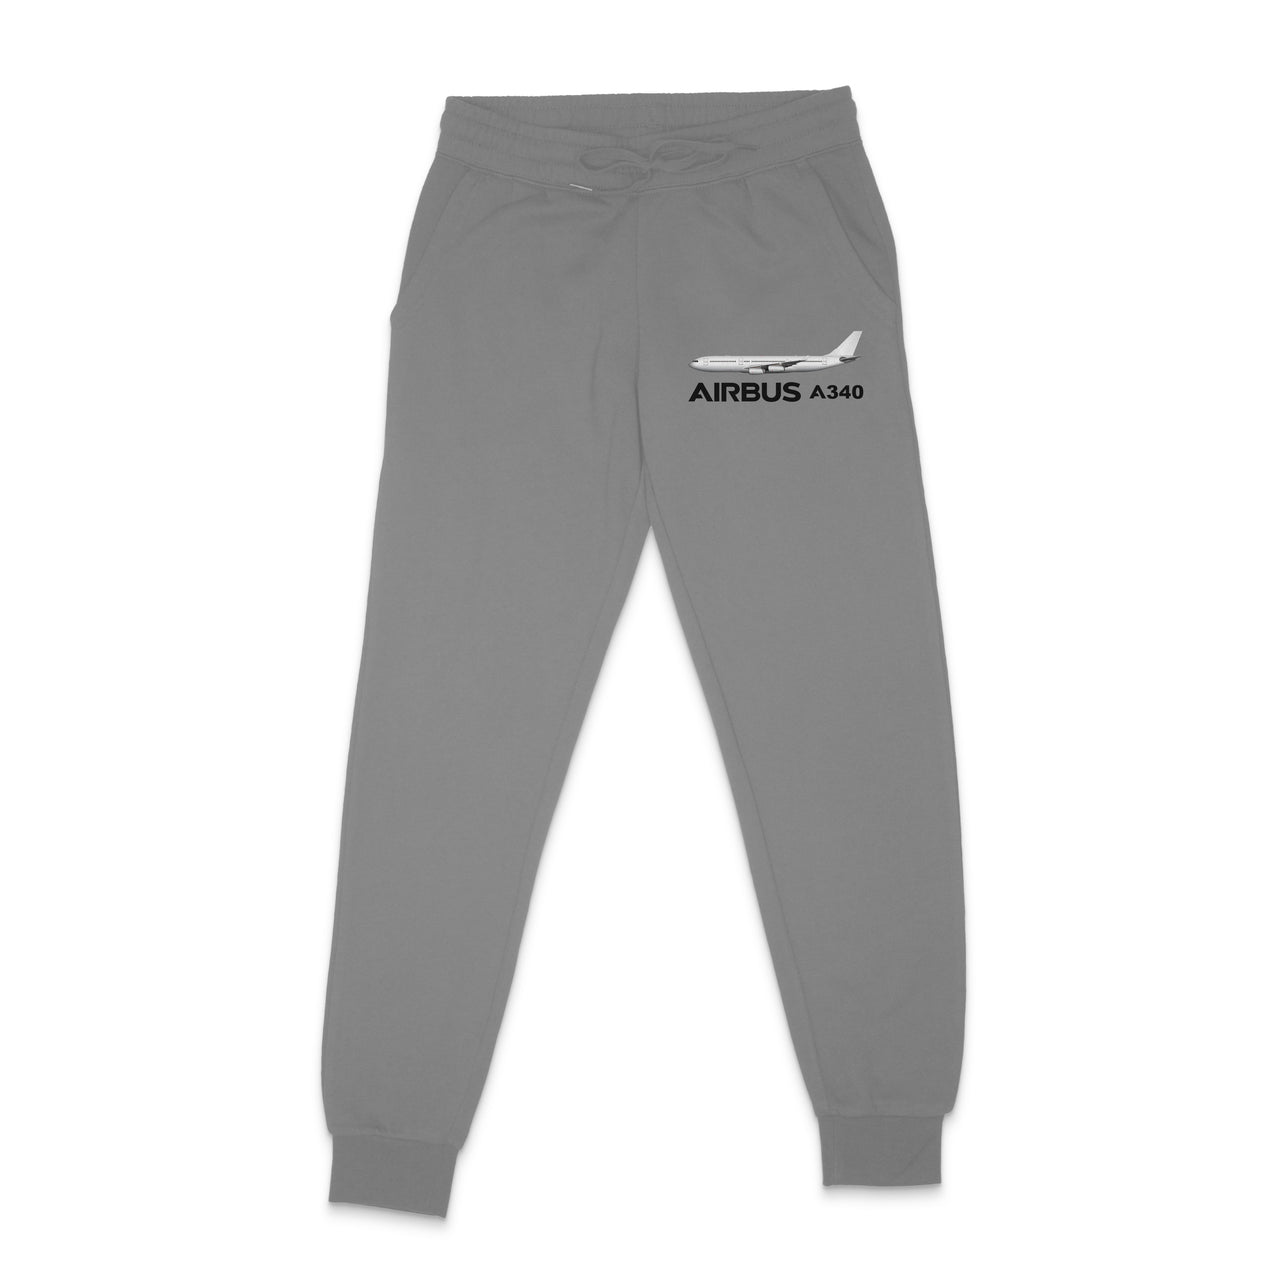 The Airbus A340 Designed Sweatpants